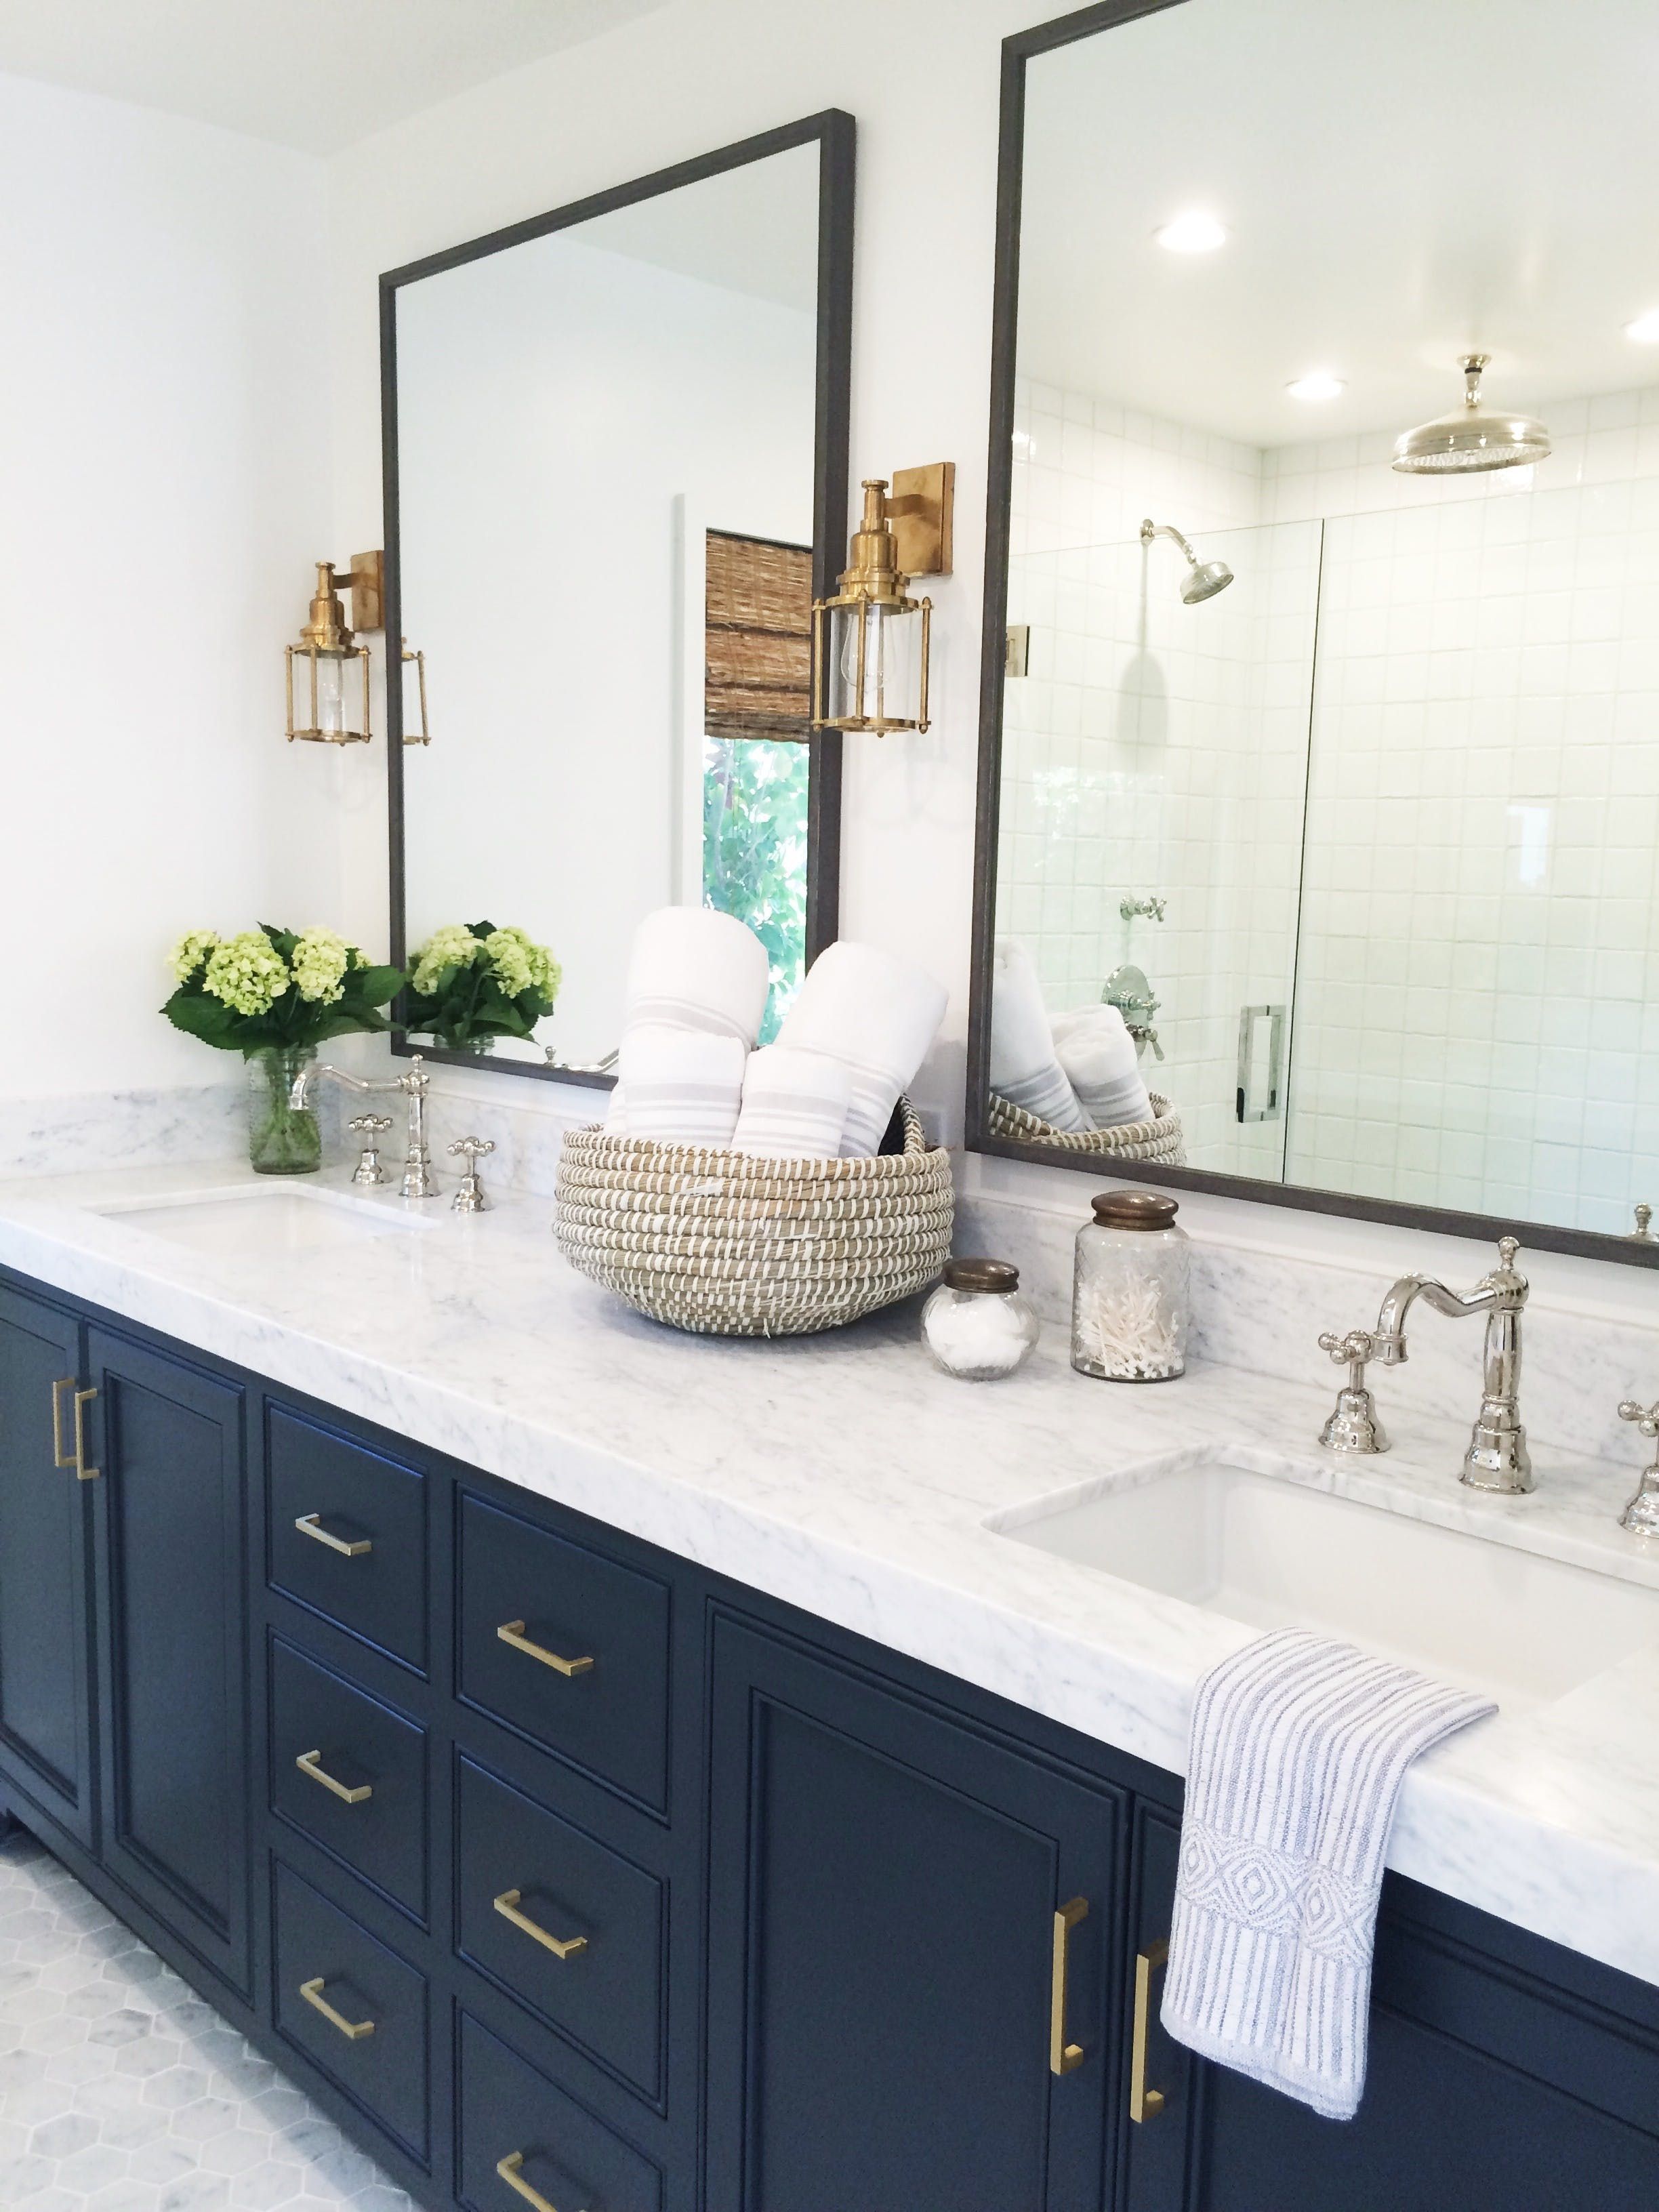 How to Choose the Right Bathroom Mirror?